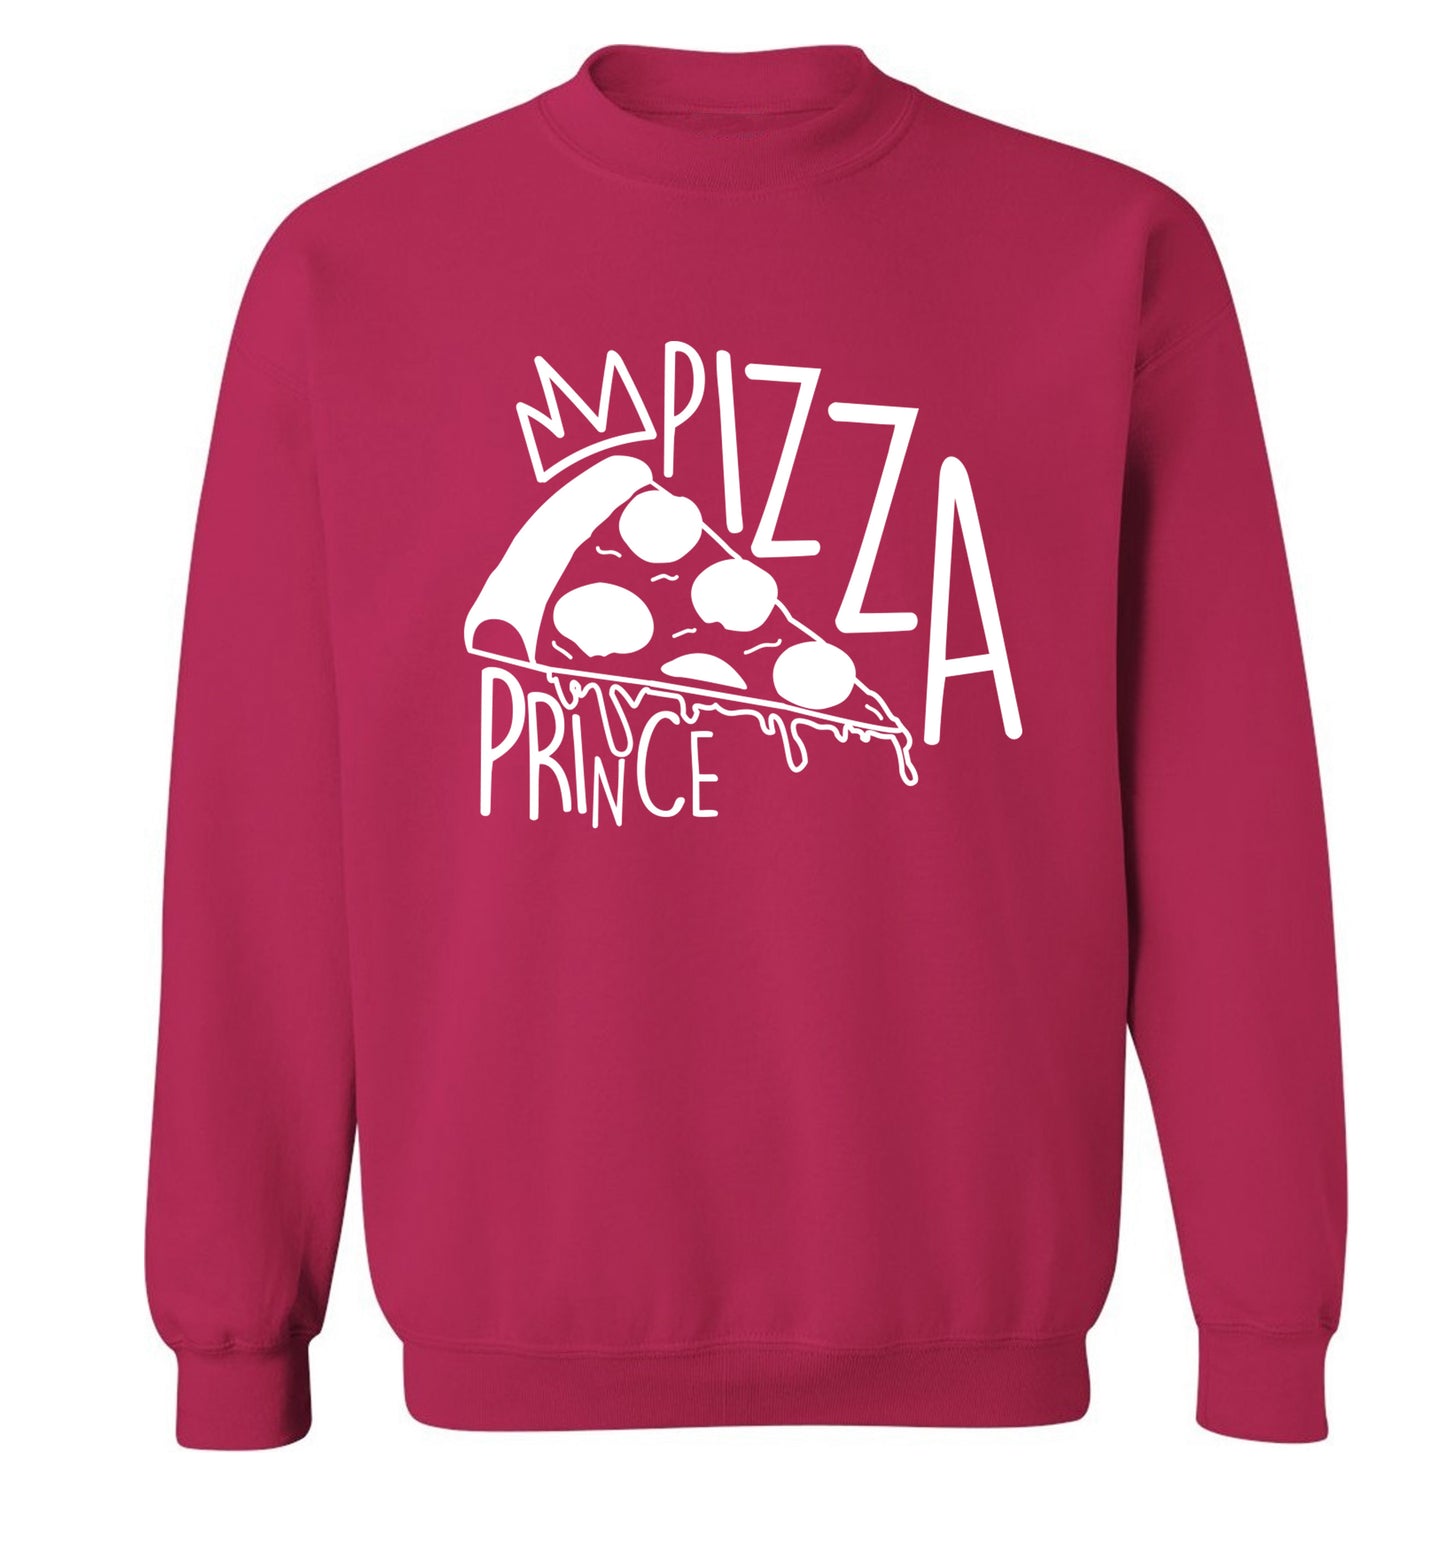 Pizza Prince Adult's unisex pink Sweater 2XL